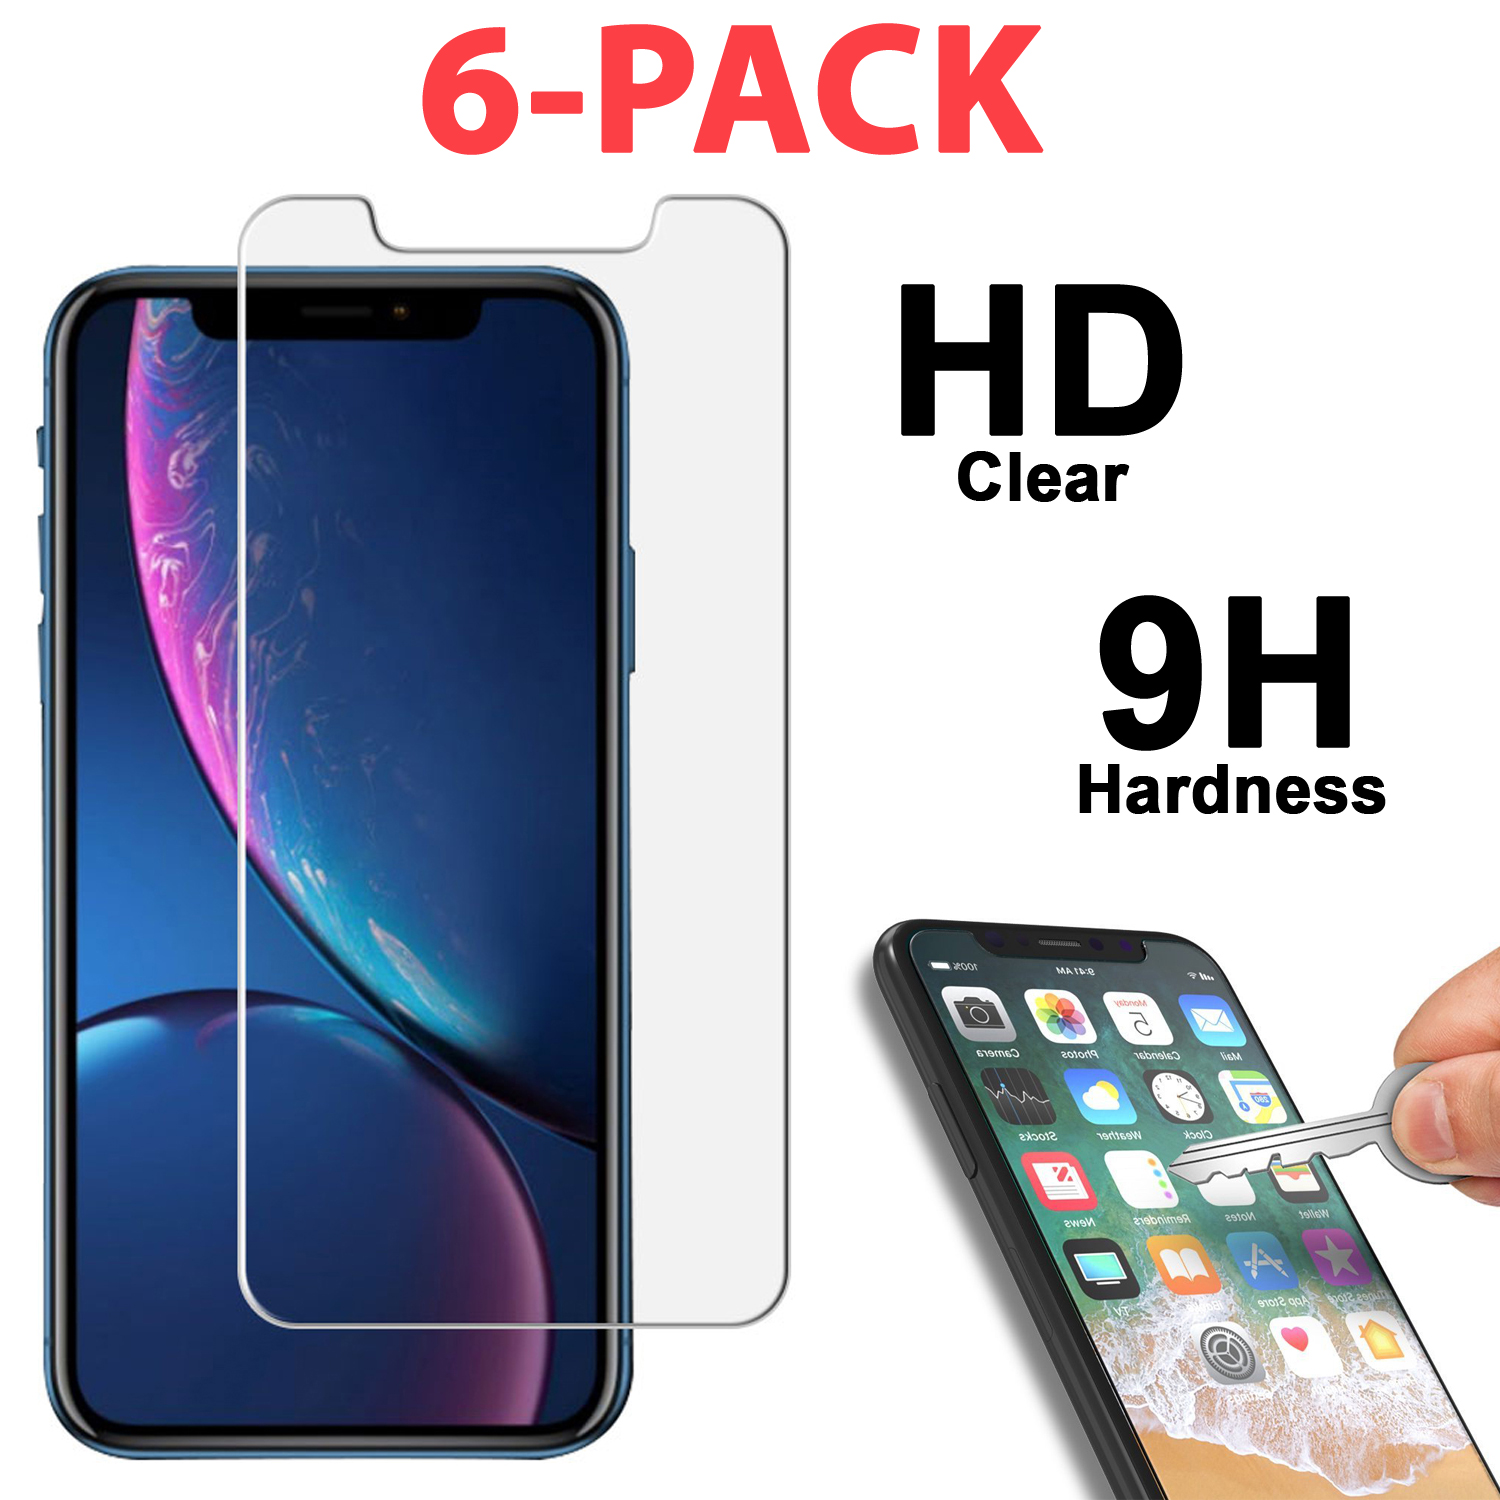 6 Pk Tempered Glass Screen Protector For Iphone 11 Pro Xr X Xs Max Se 6 7 8 Plus